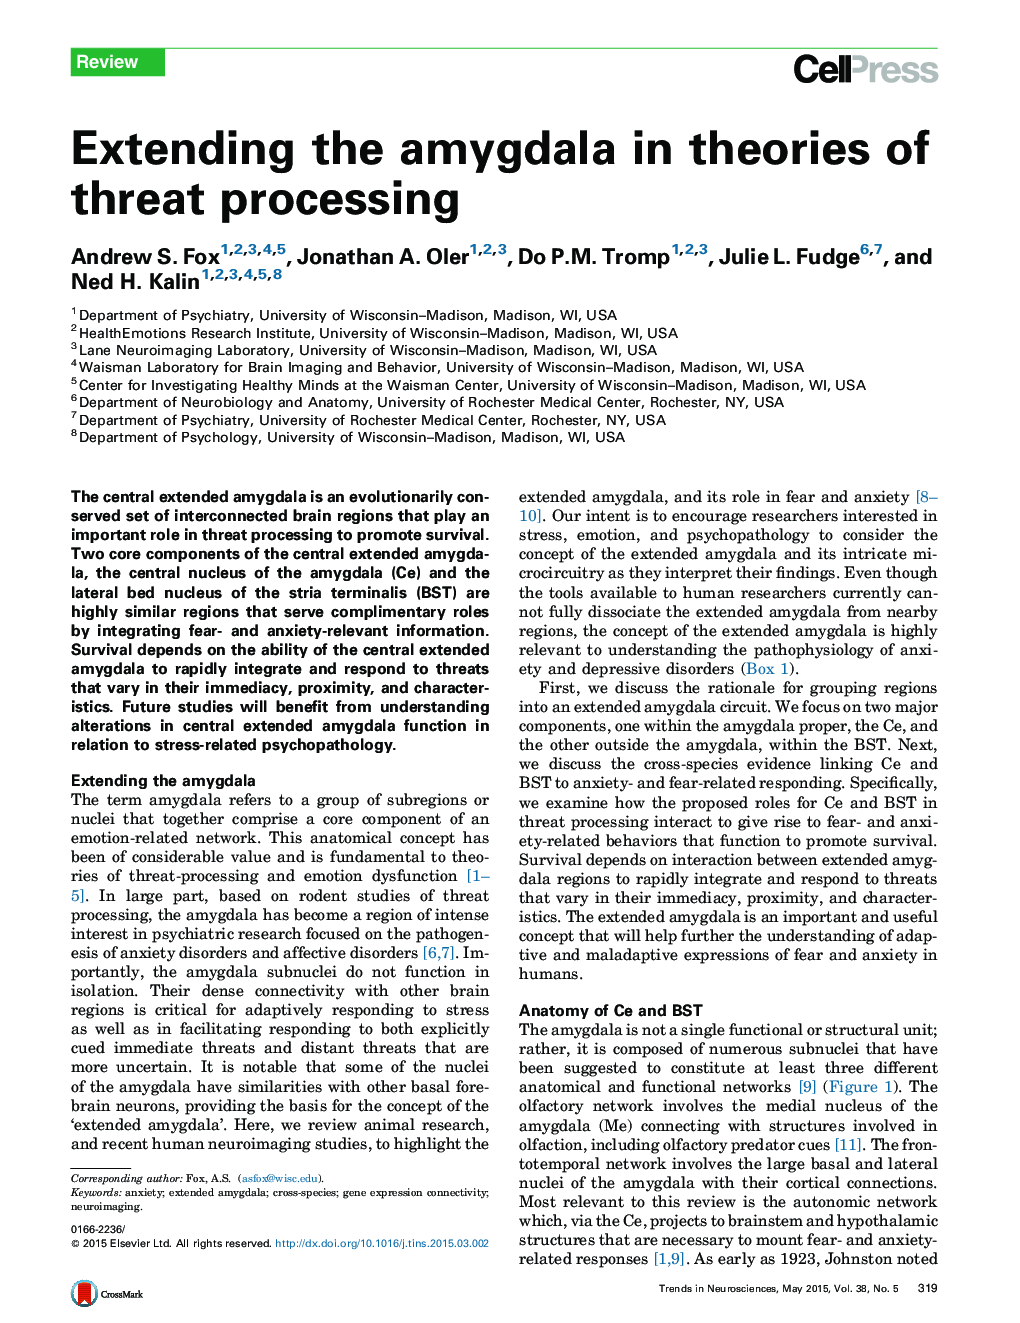 Extending the amygdala in theories of threat processing